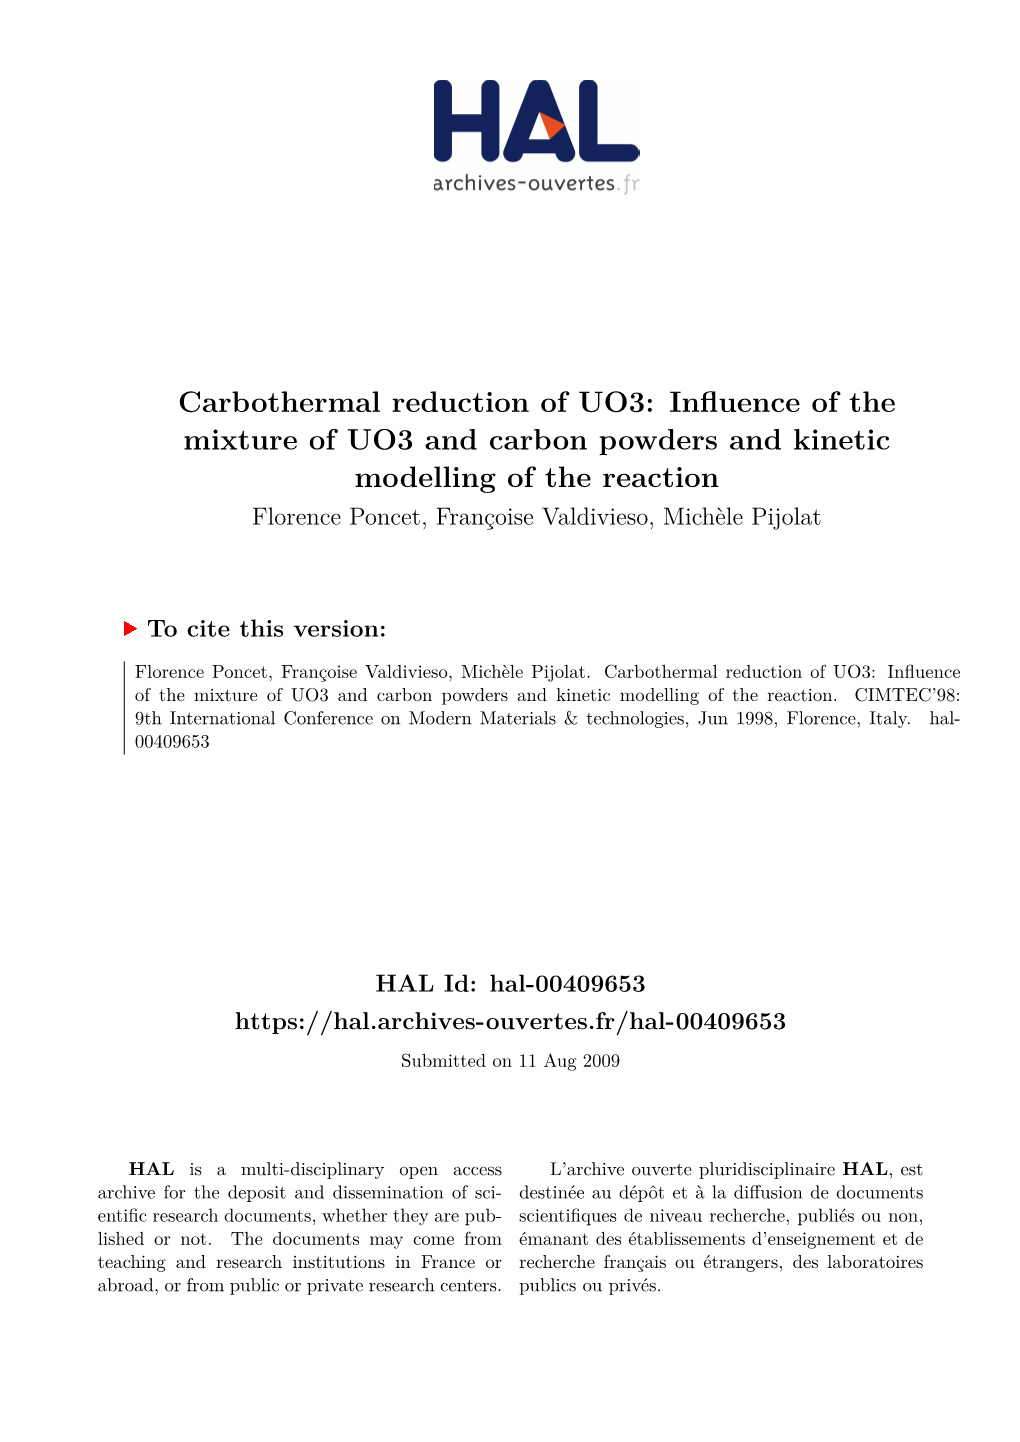 Carbothermal Reduction of UO3: Influence of the Mixture of UO3 and Carbon Powders and Kinetic Modelling of the Reaction